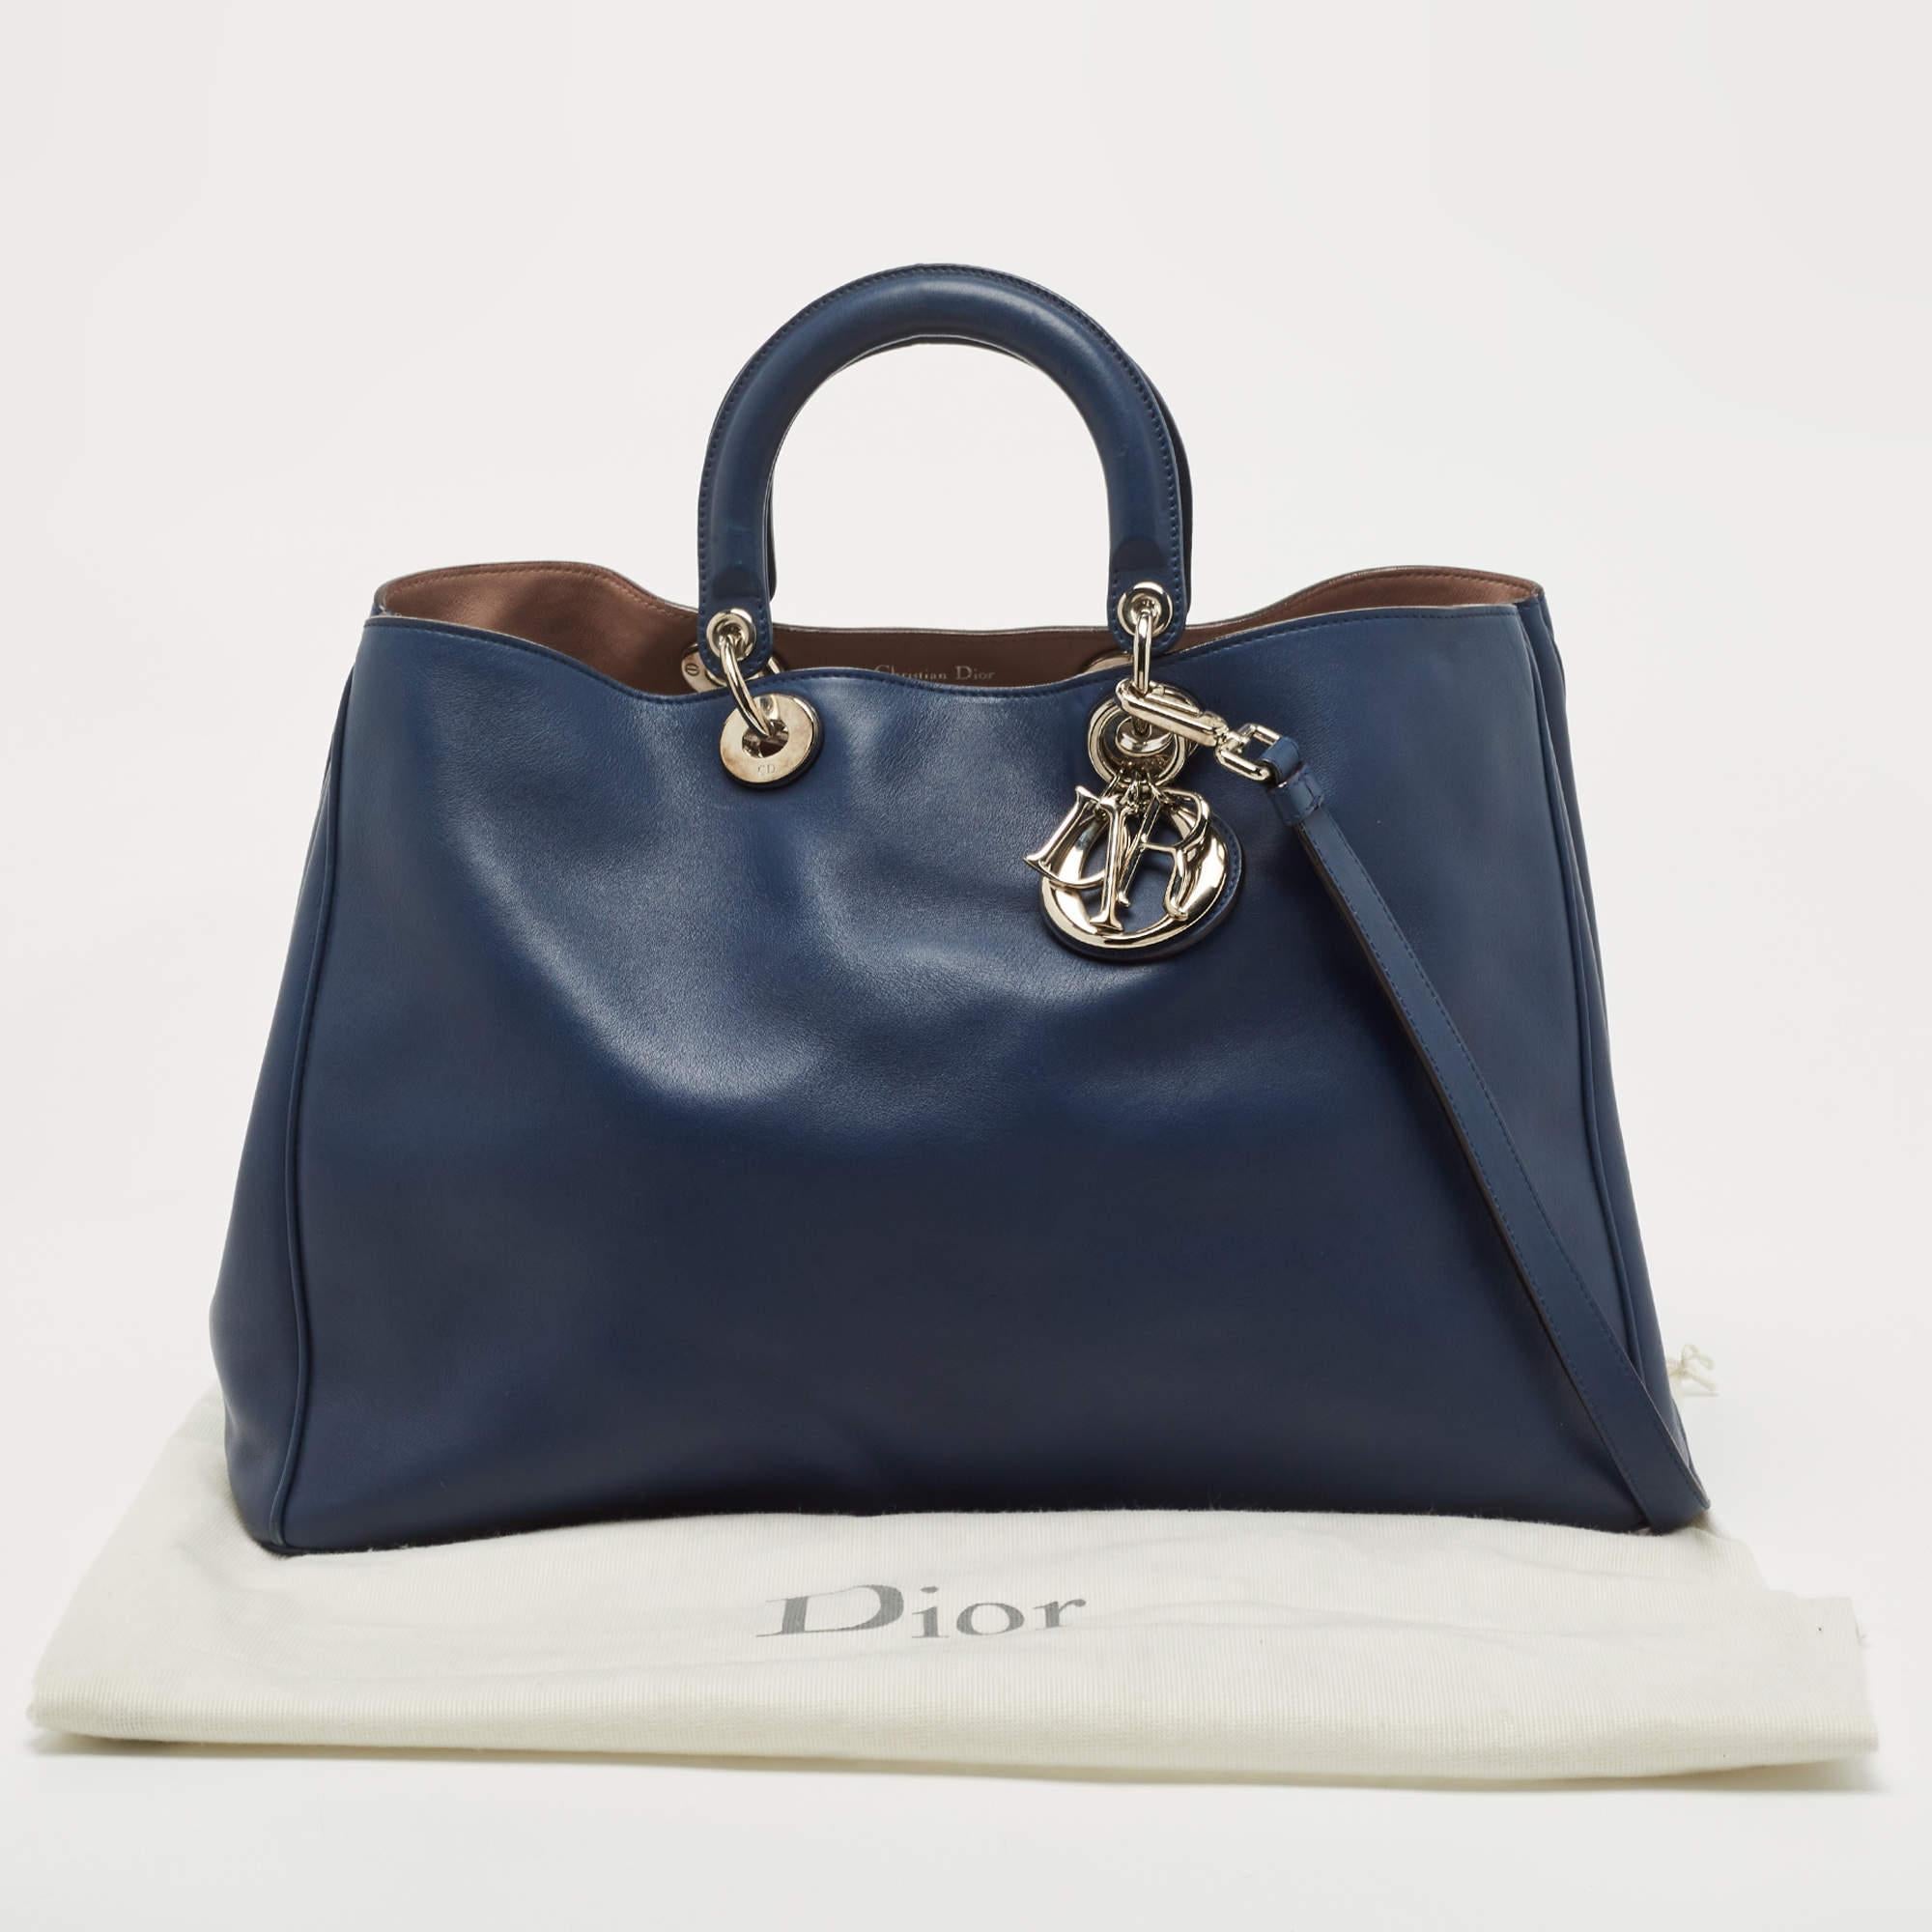 Dior Navy Blue Leather Extra Large Diorissimo Shopper Tote 9